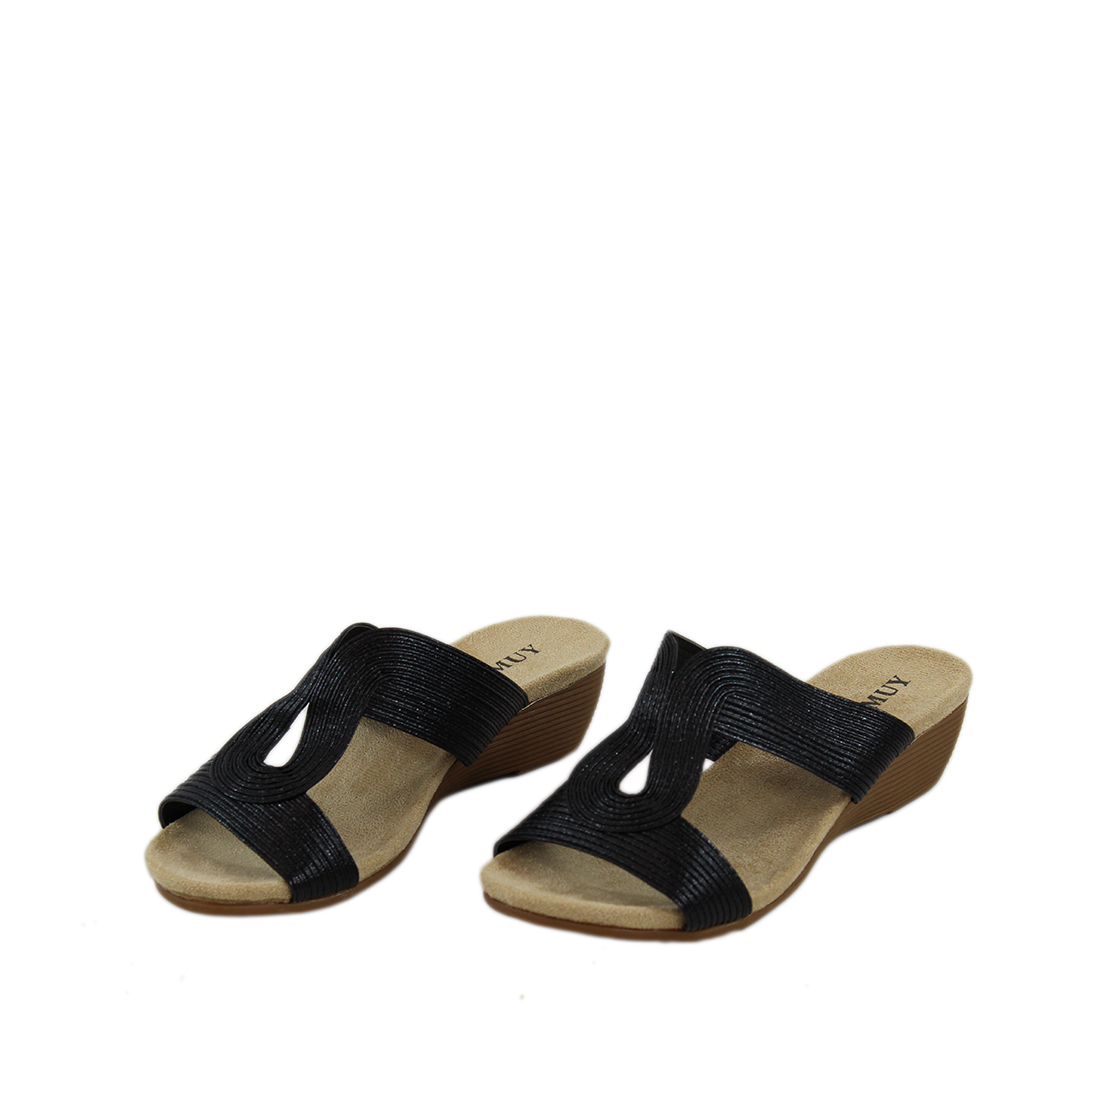 Shuny Strap with small wedge